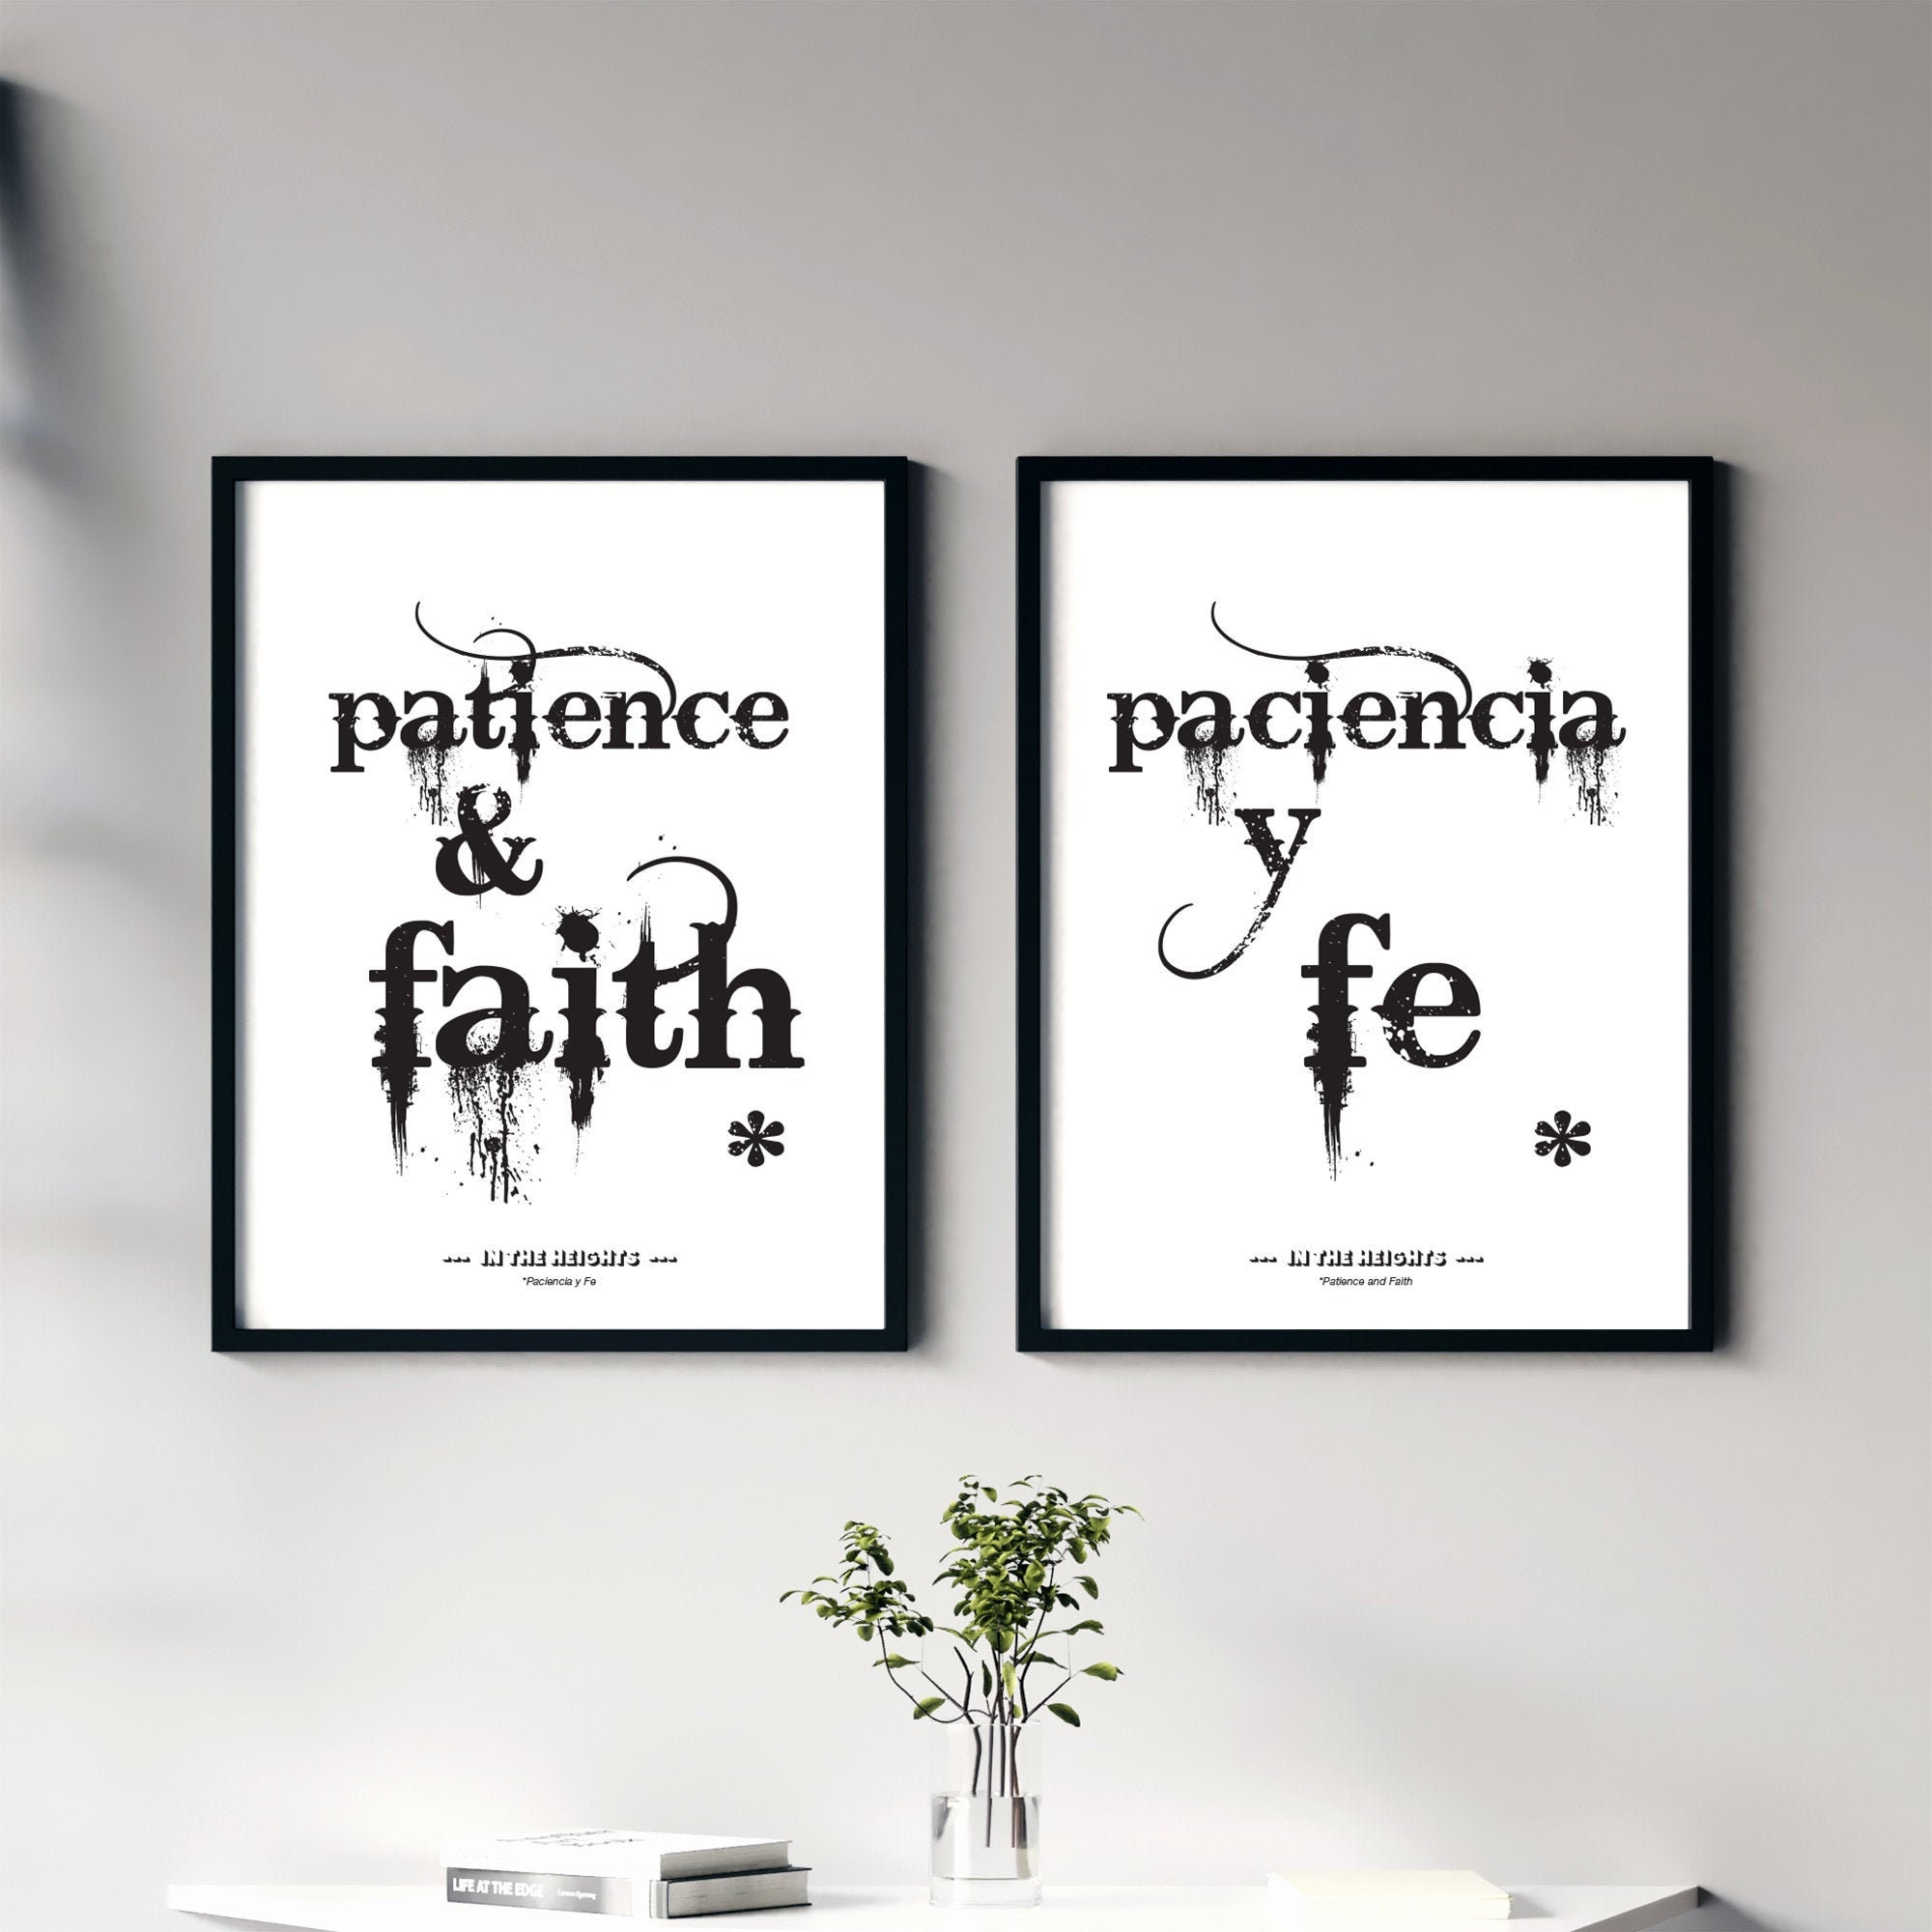 Lab No. 4 All We Need Is Guns N' Roses Patience Lyrics Quote Framed Poster  In A3 Size : : Home & Kitchen